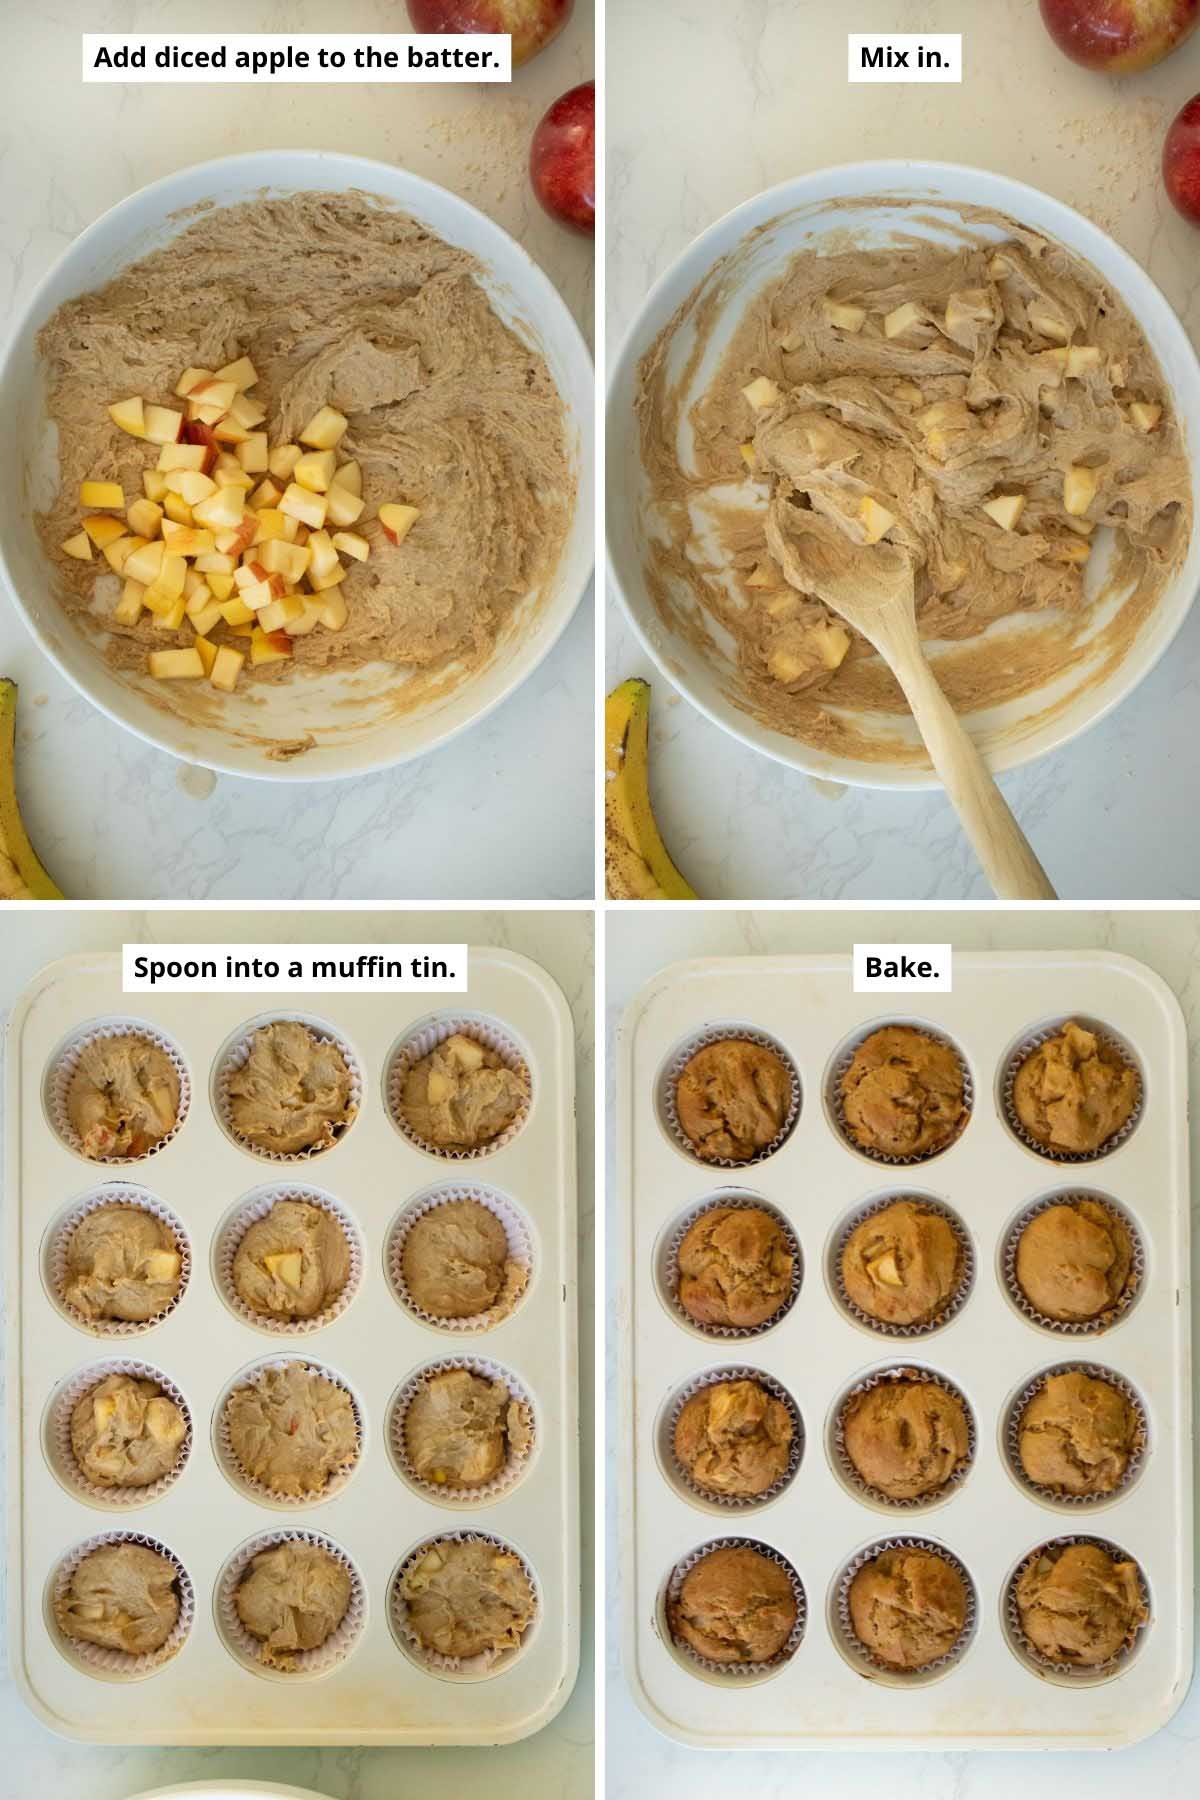 image collage showing the apples in the batter before and after mixing and the muffins in the pan before and after baking